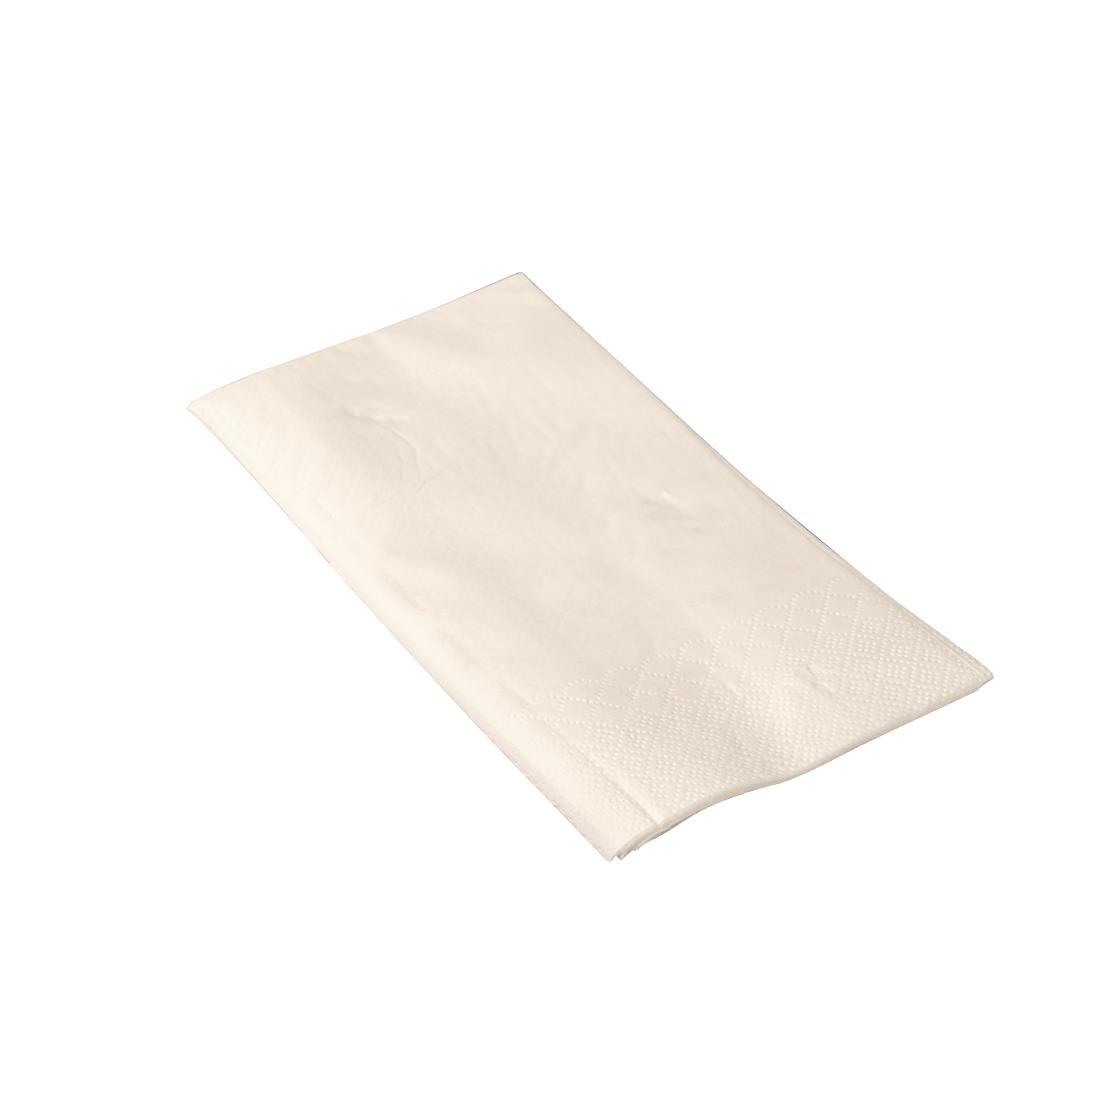 Fiesta Recyclable Dinner Napkin White 40x40cm 2ply 1/8 Fold (Pack of 250) - CM565  - 4